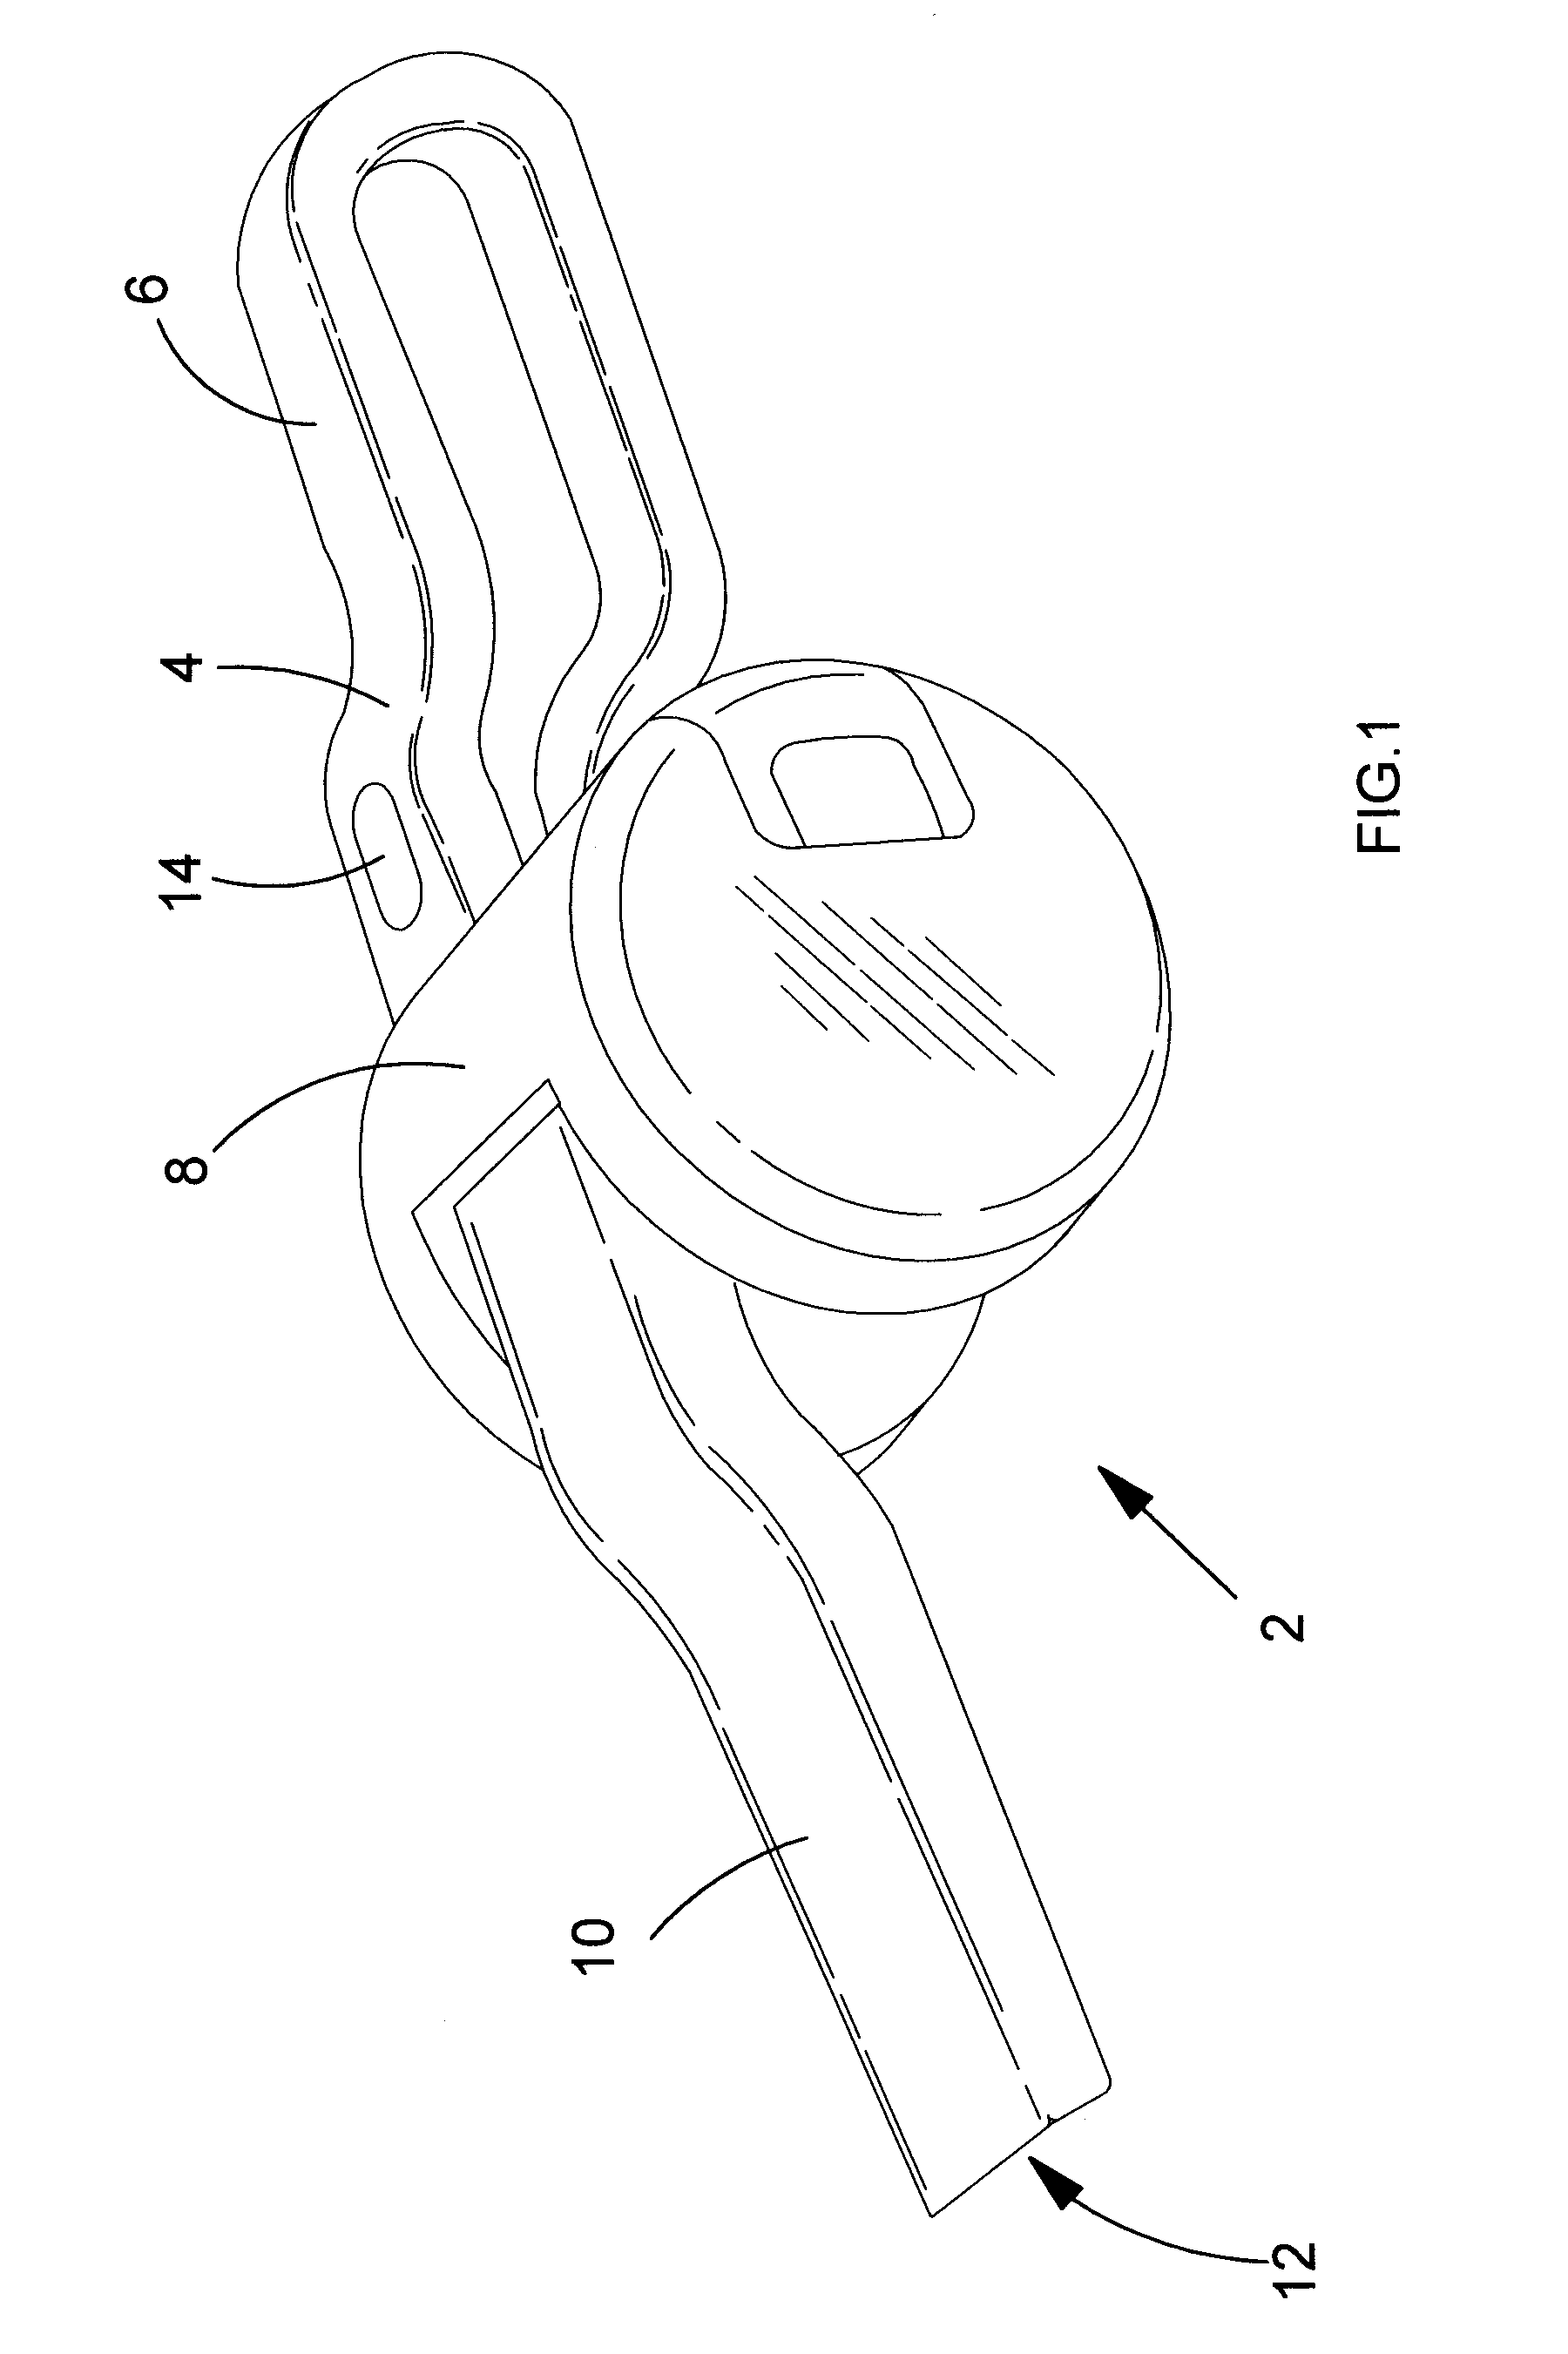 Motor, fan and cyclonic separation apparatus arrangement for a vacuum cleaner